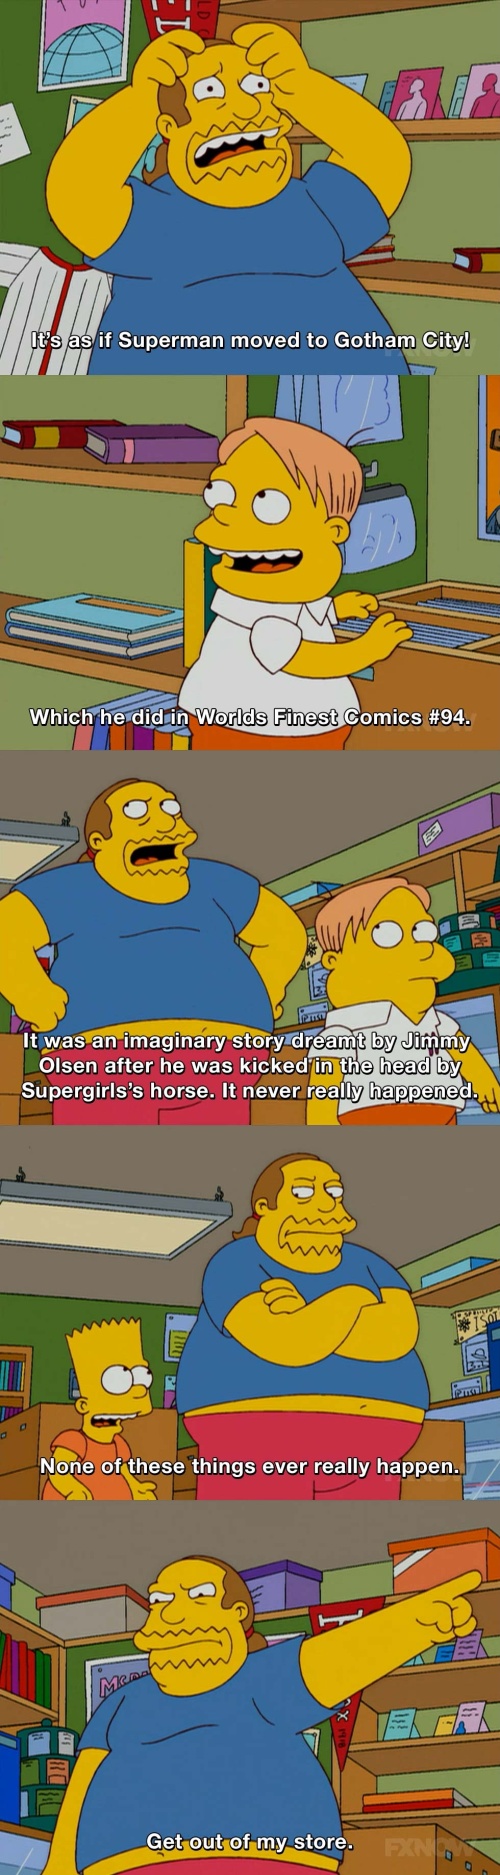 The Simpsons - It’s as if Superman moved to Gotham City!